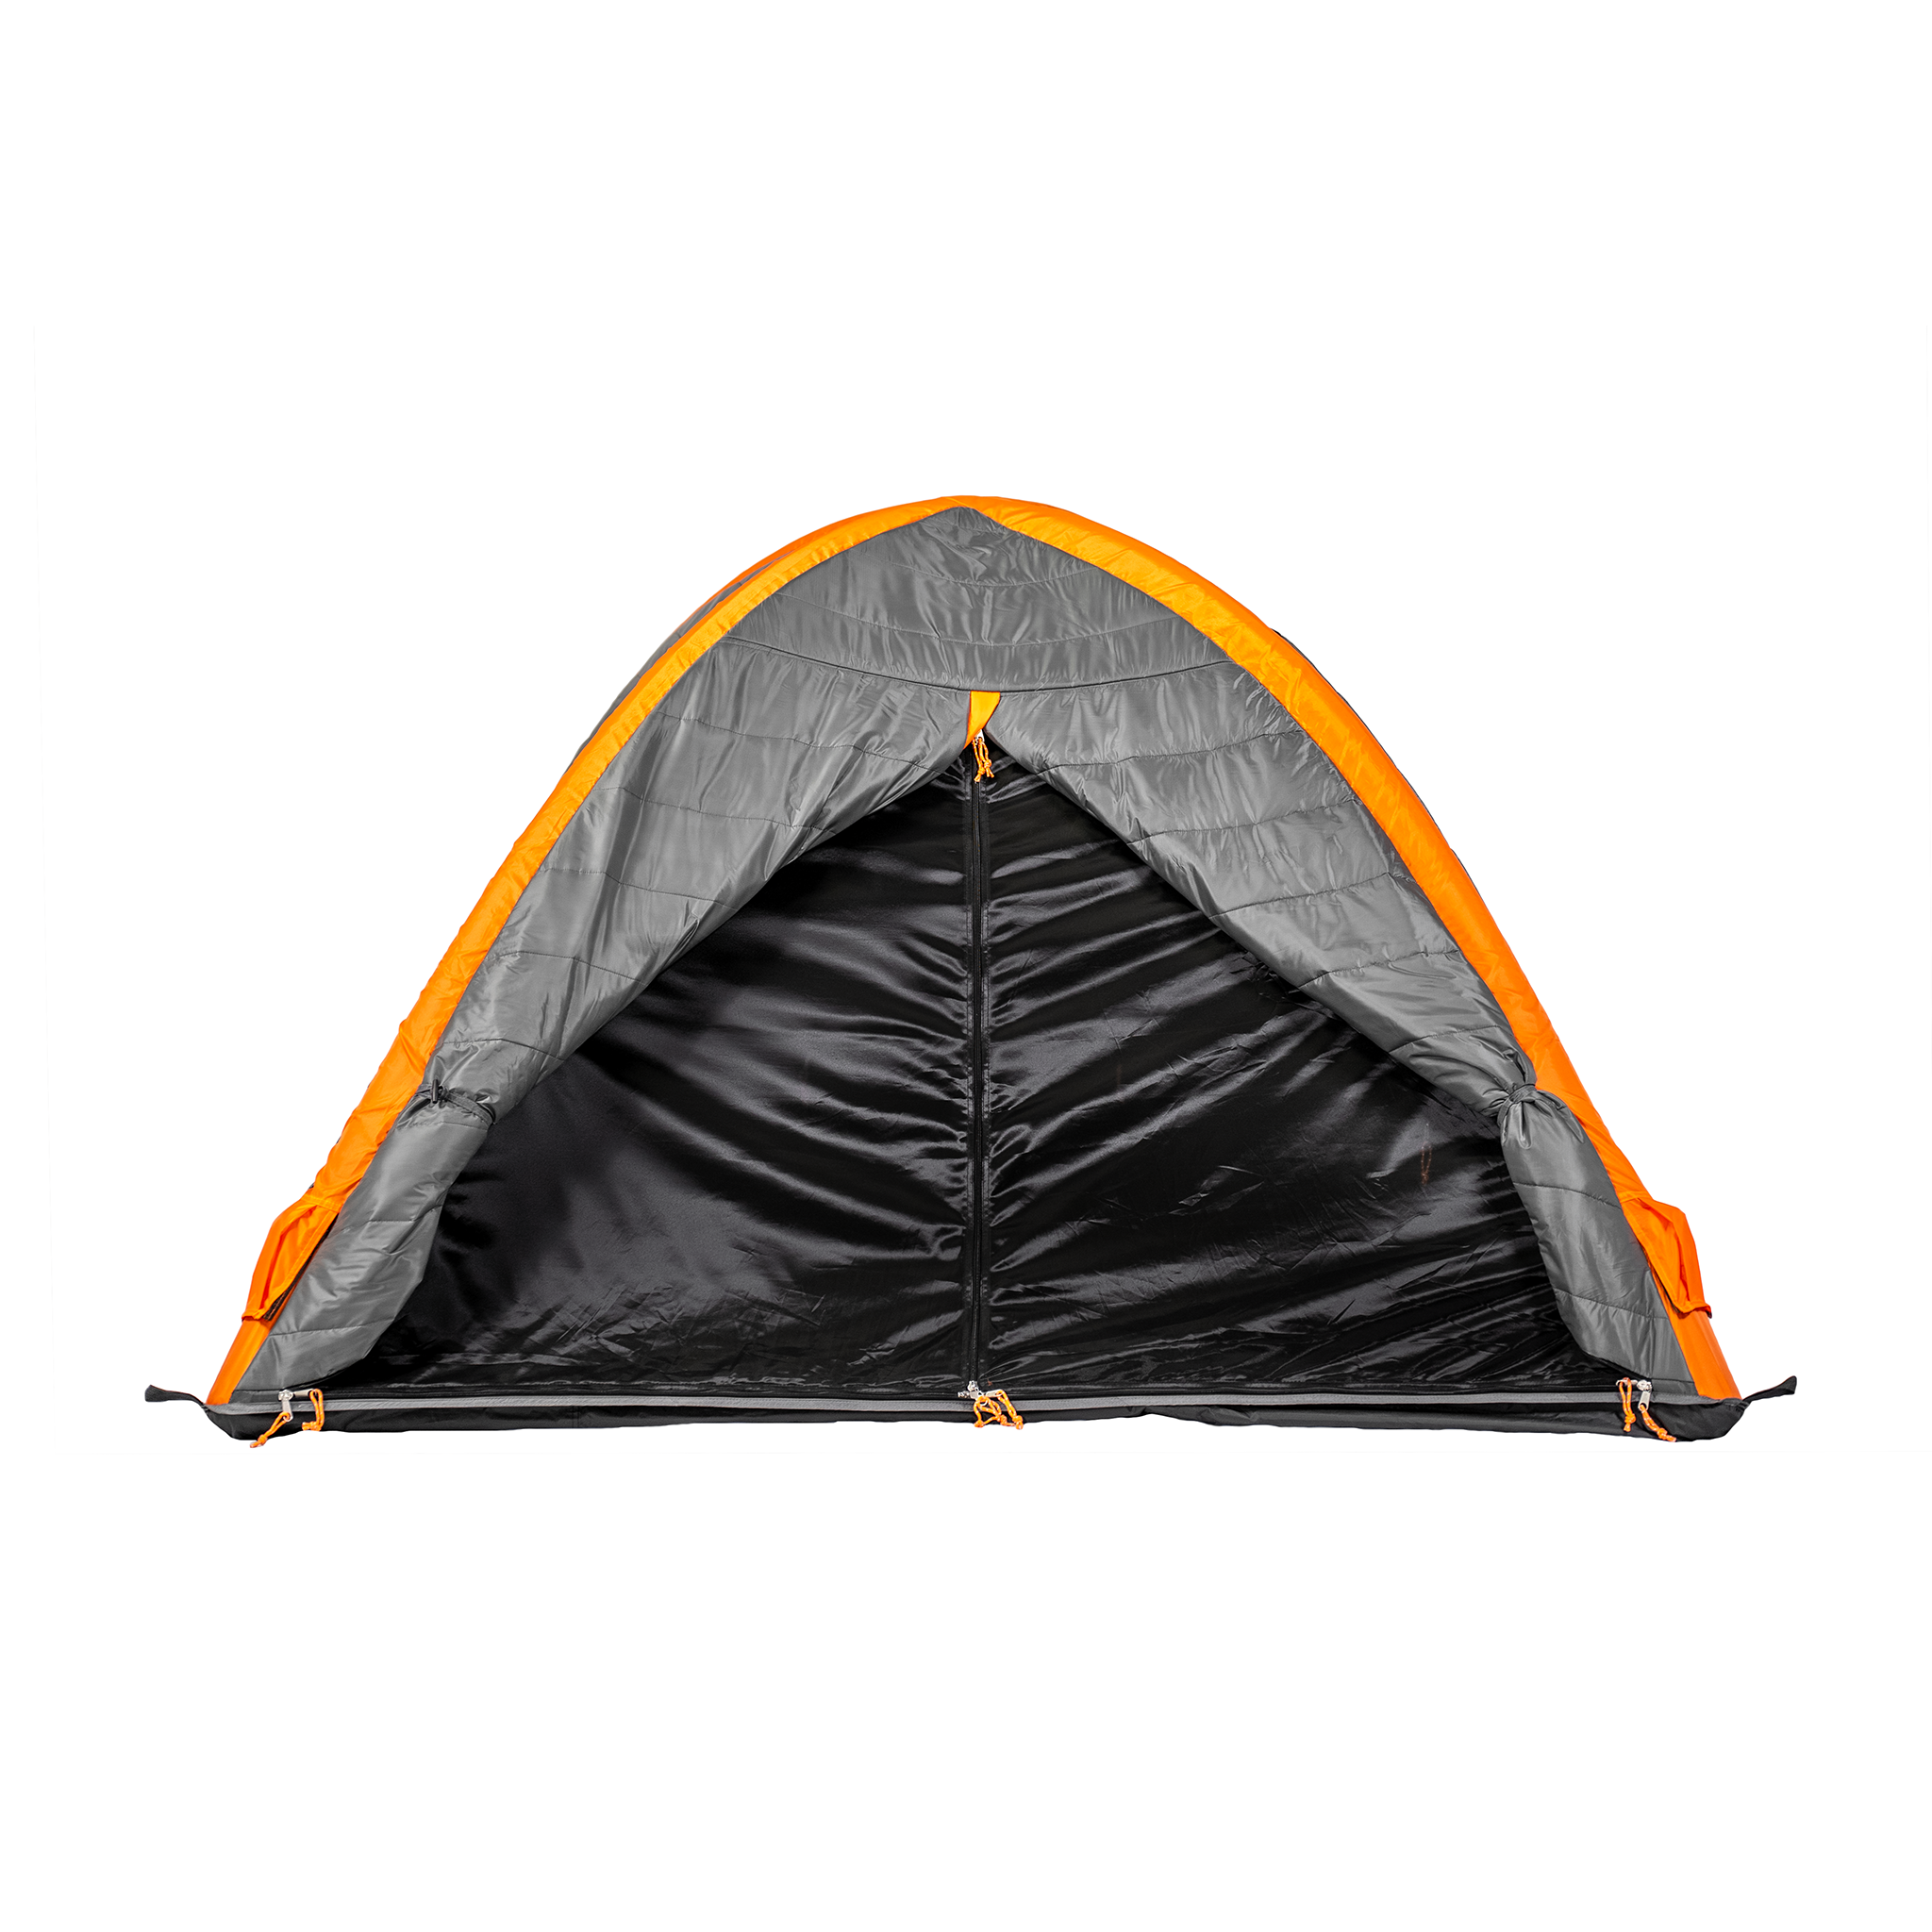 Crucoon | 3 Person Insulated Inner Tent With Temperature Regulating, Noise Dampening And Light Blocking Features | Graphene Infused Insulation For Lightweight Design